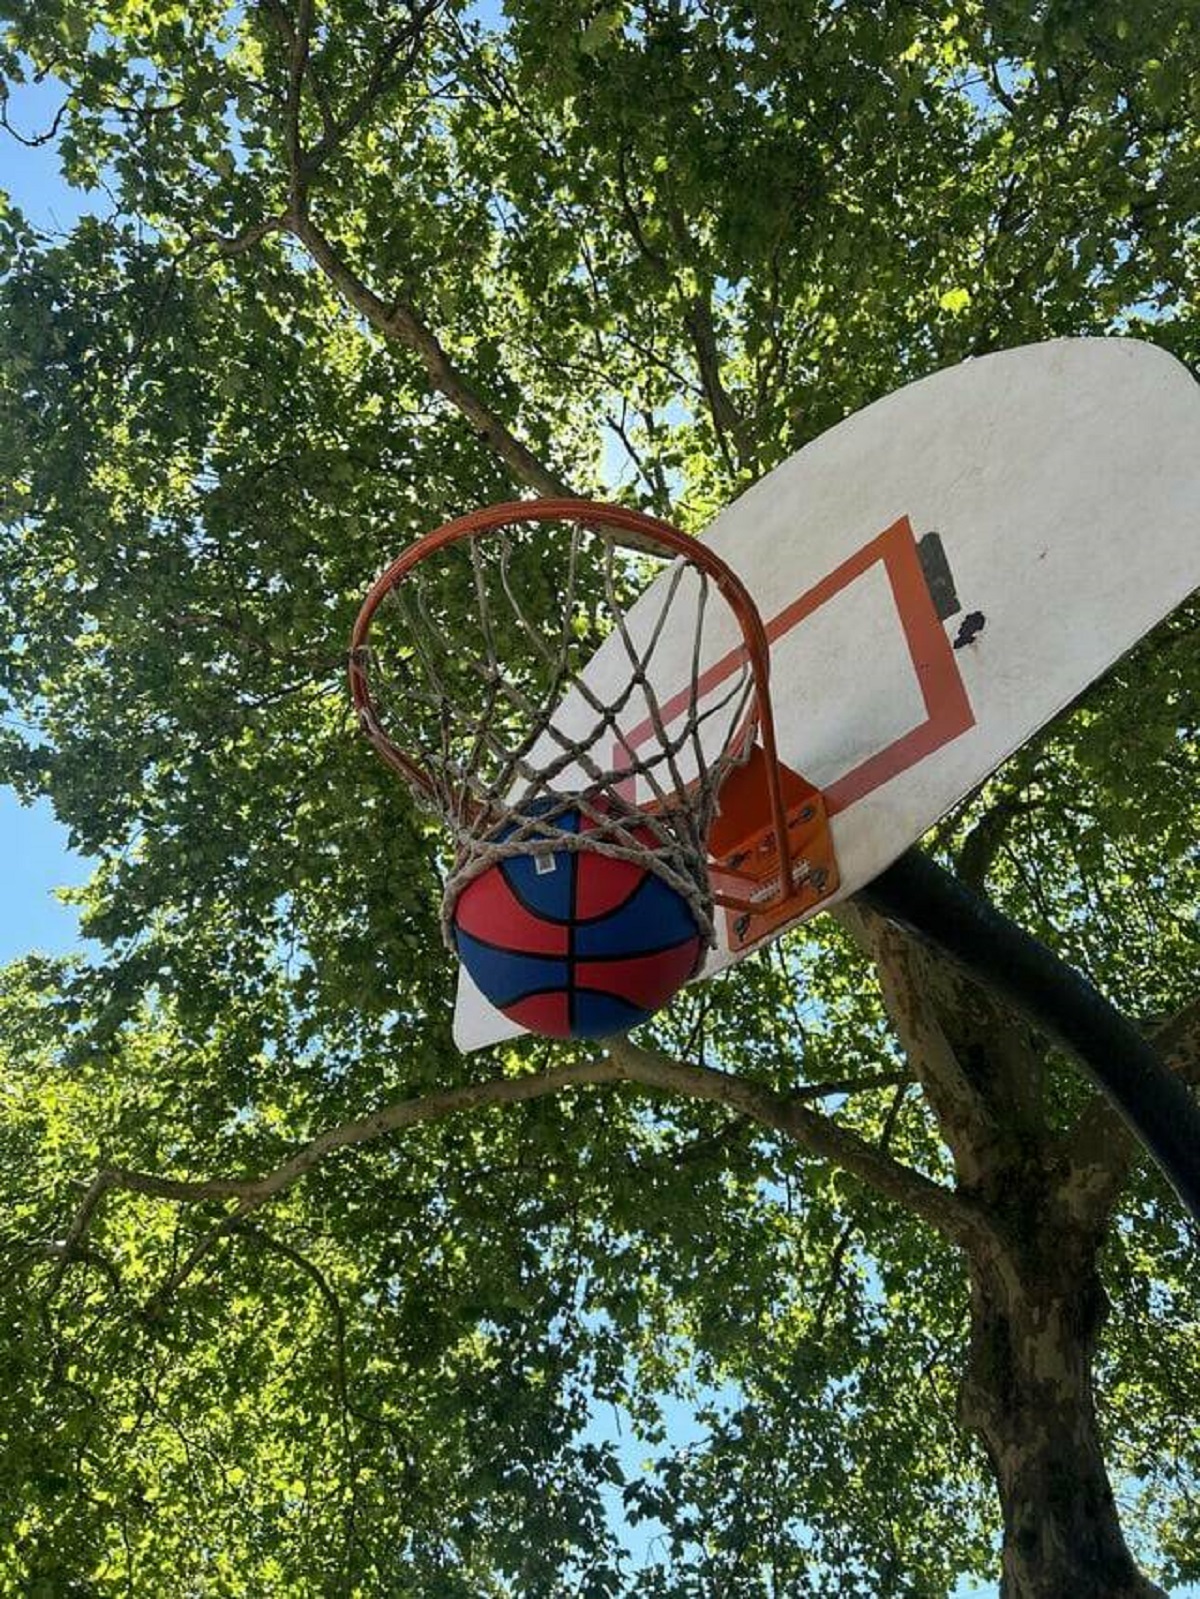 "Bought a basketball, got a sunny holiday and made it to the local court to shoot baskets by myself"